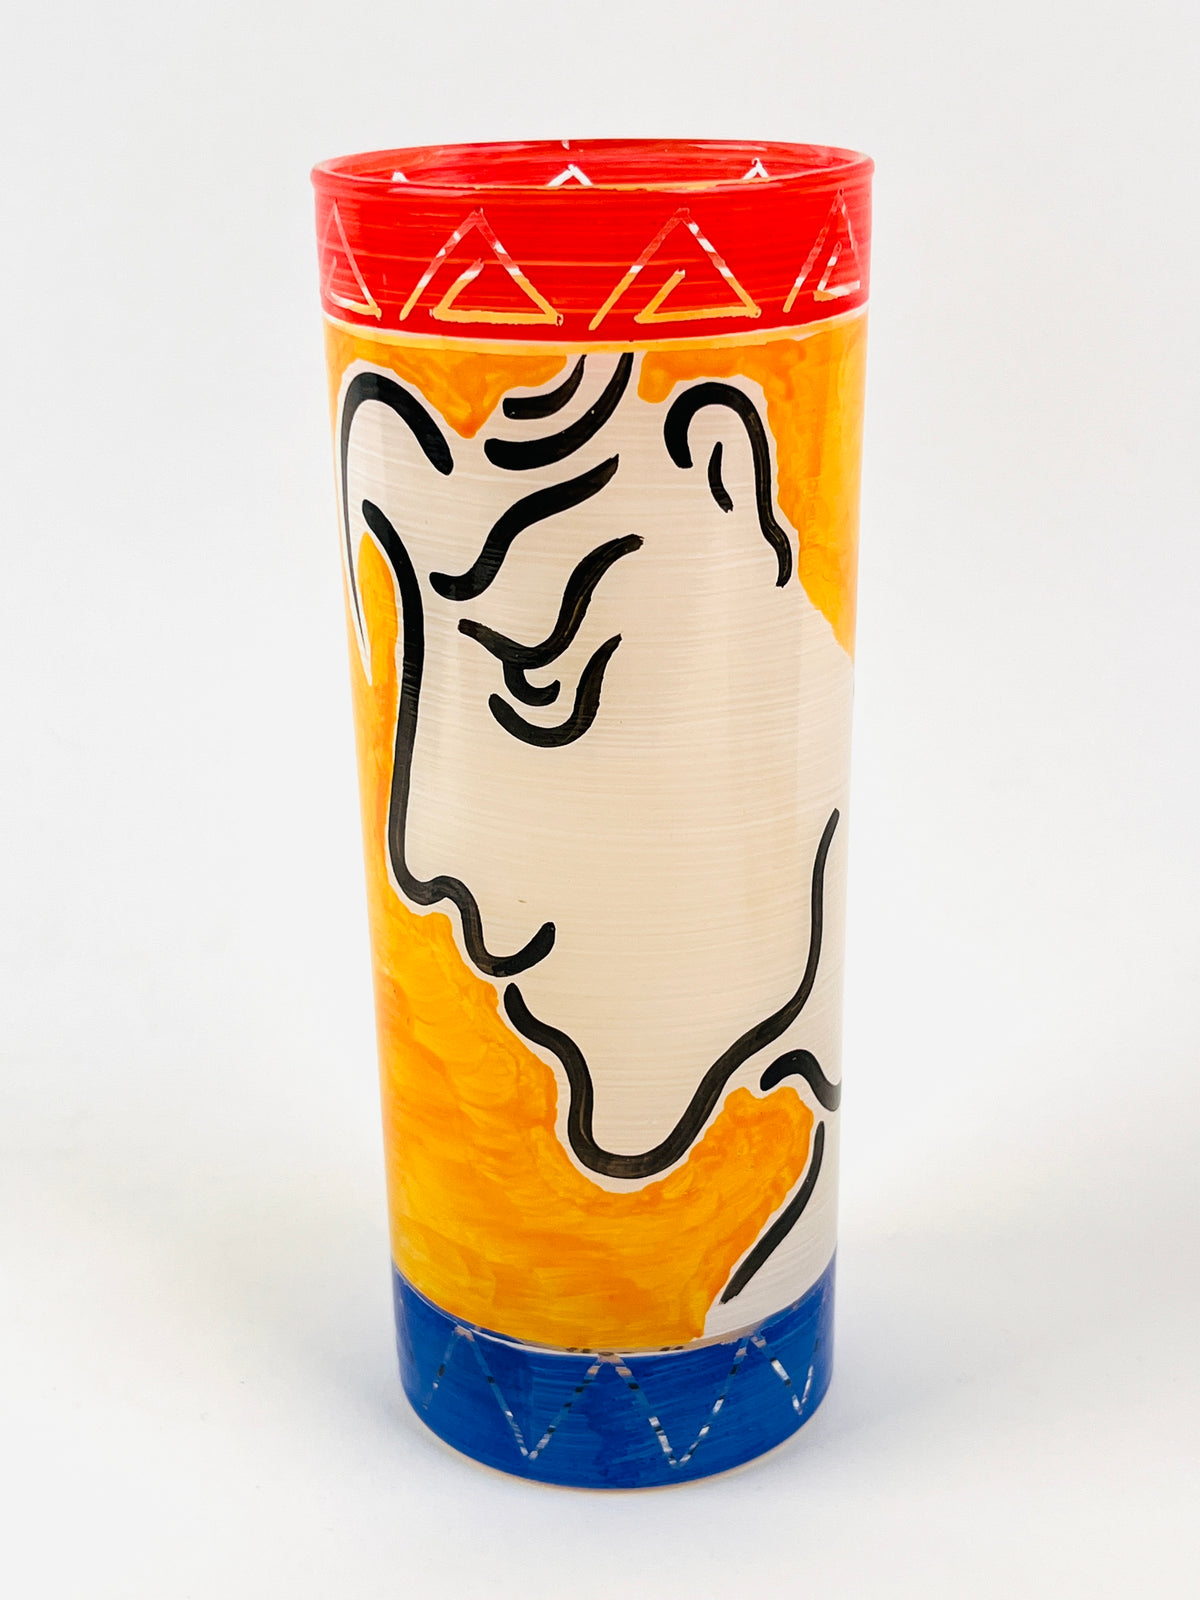 90s Hand-Painted Figurative Glasses